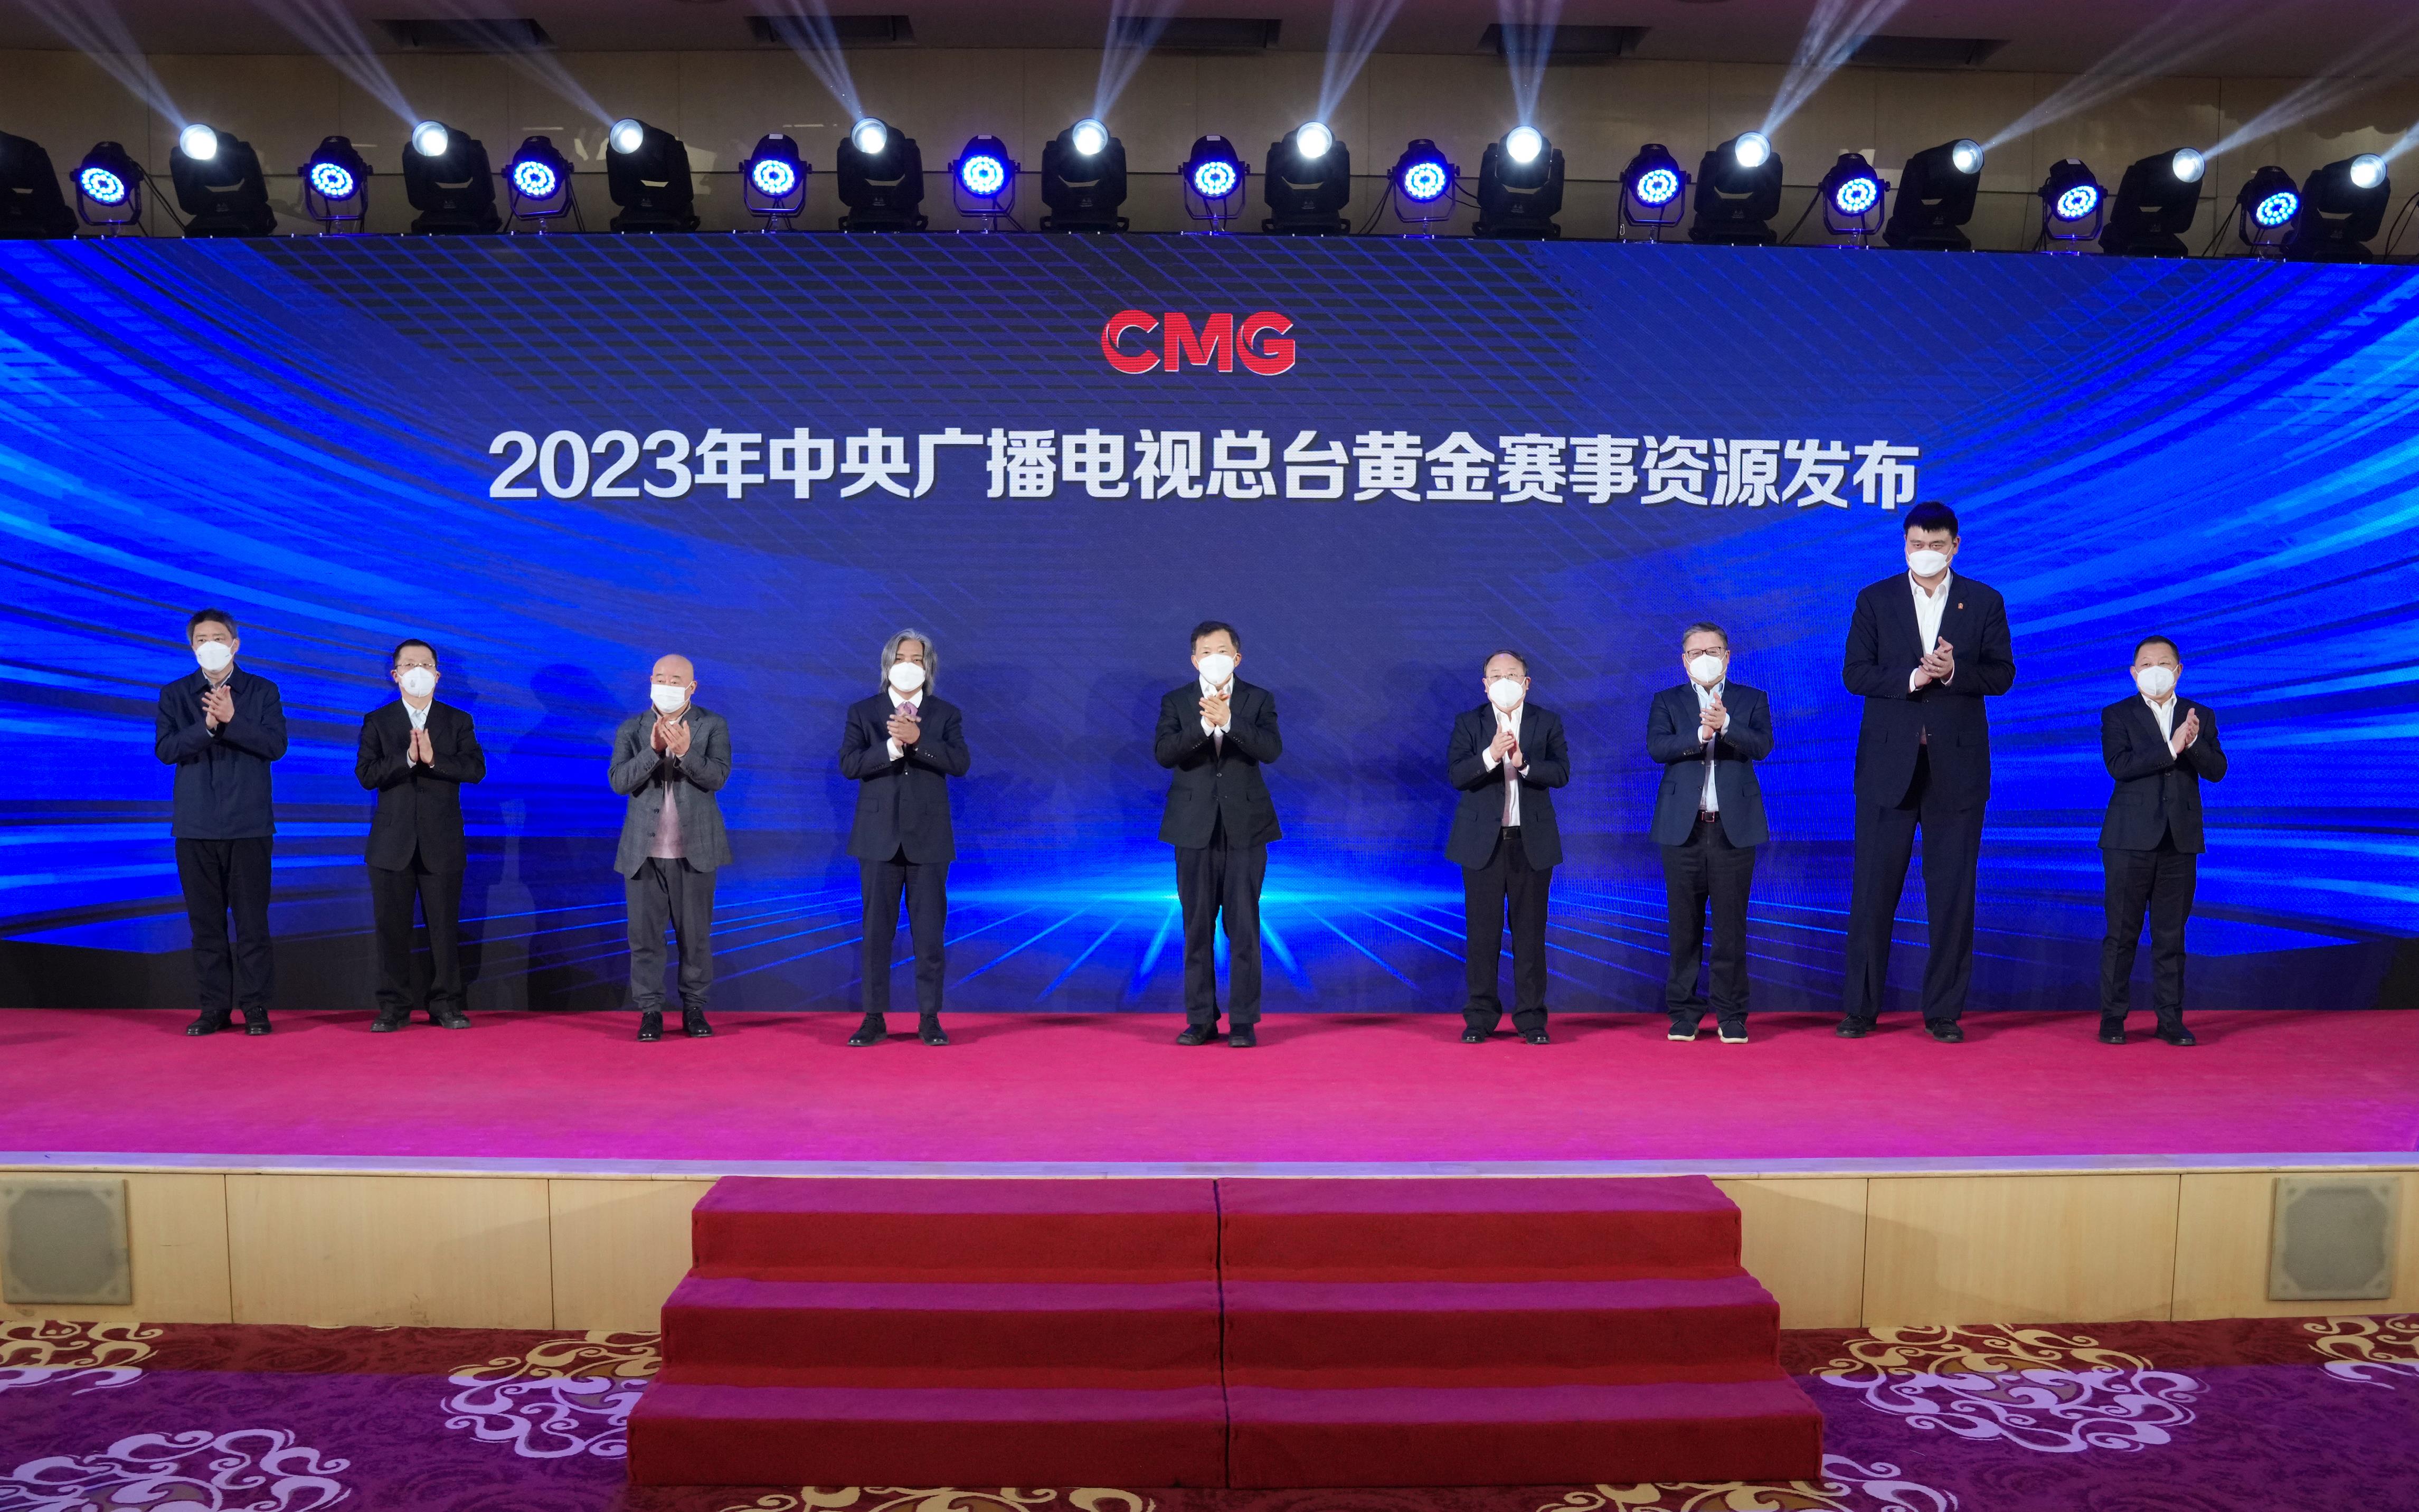 CMG releases the broadcasting plans of 